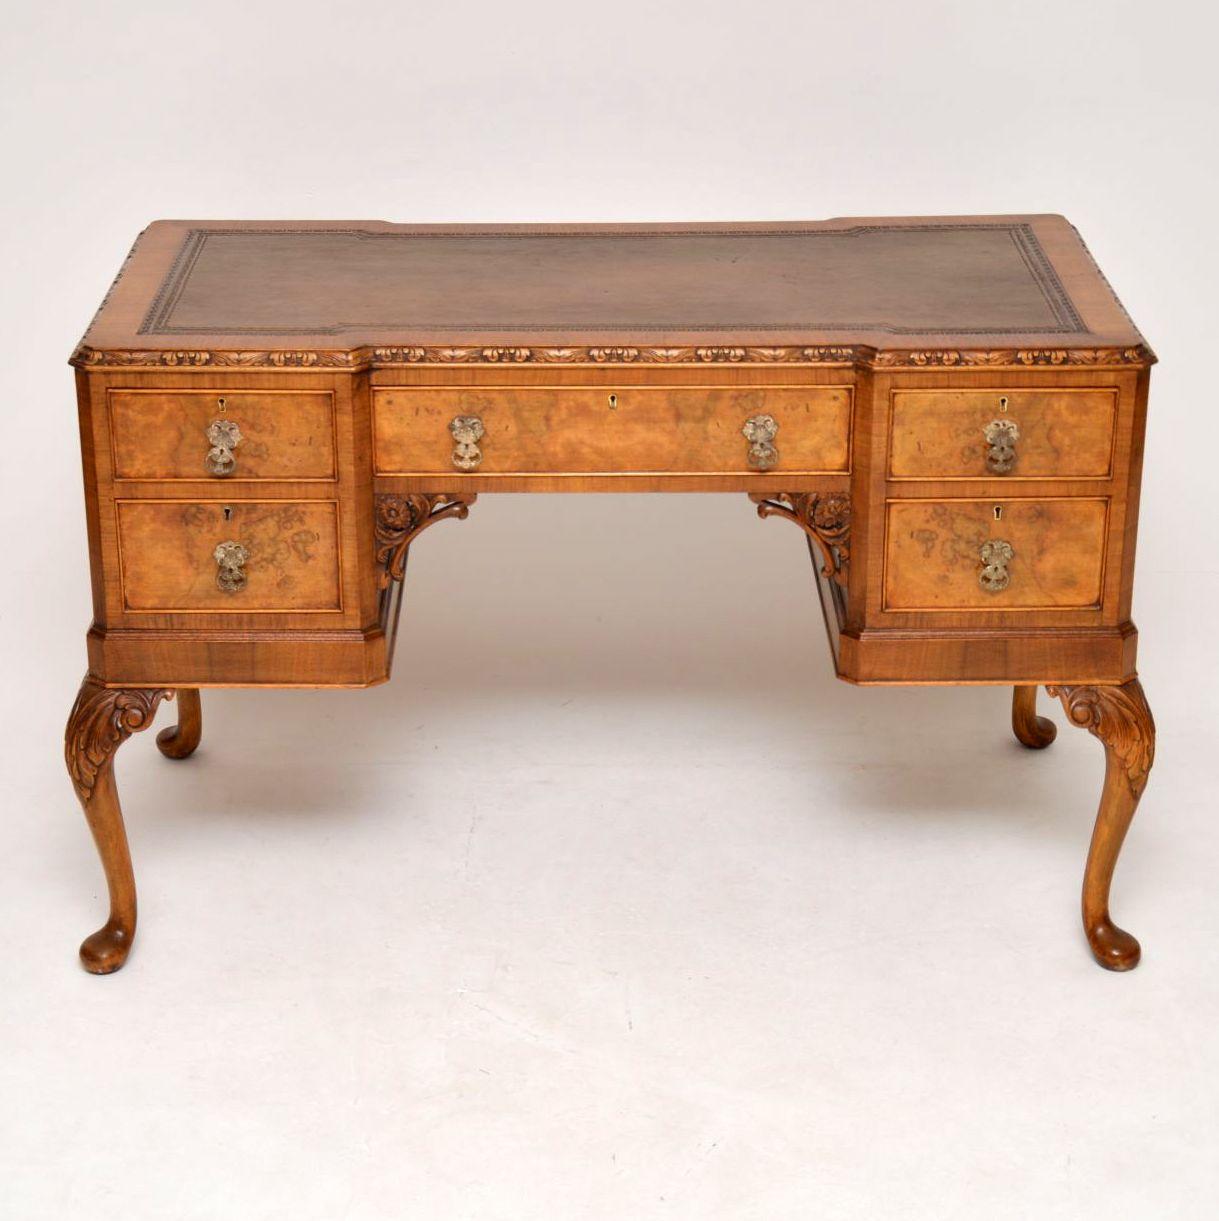 Great looking antique walnut desk dating from the 1920s period with a lovely mellow color and in excellent condition. This desk is of extremely high quality and has plenty of detailed carvings. The back is finished off as nice as the front and both